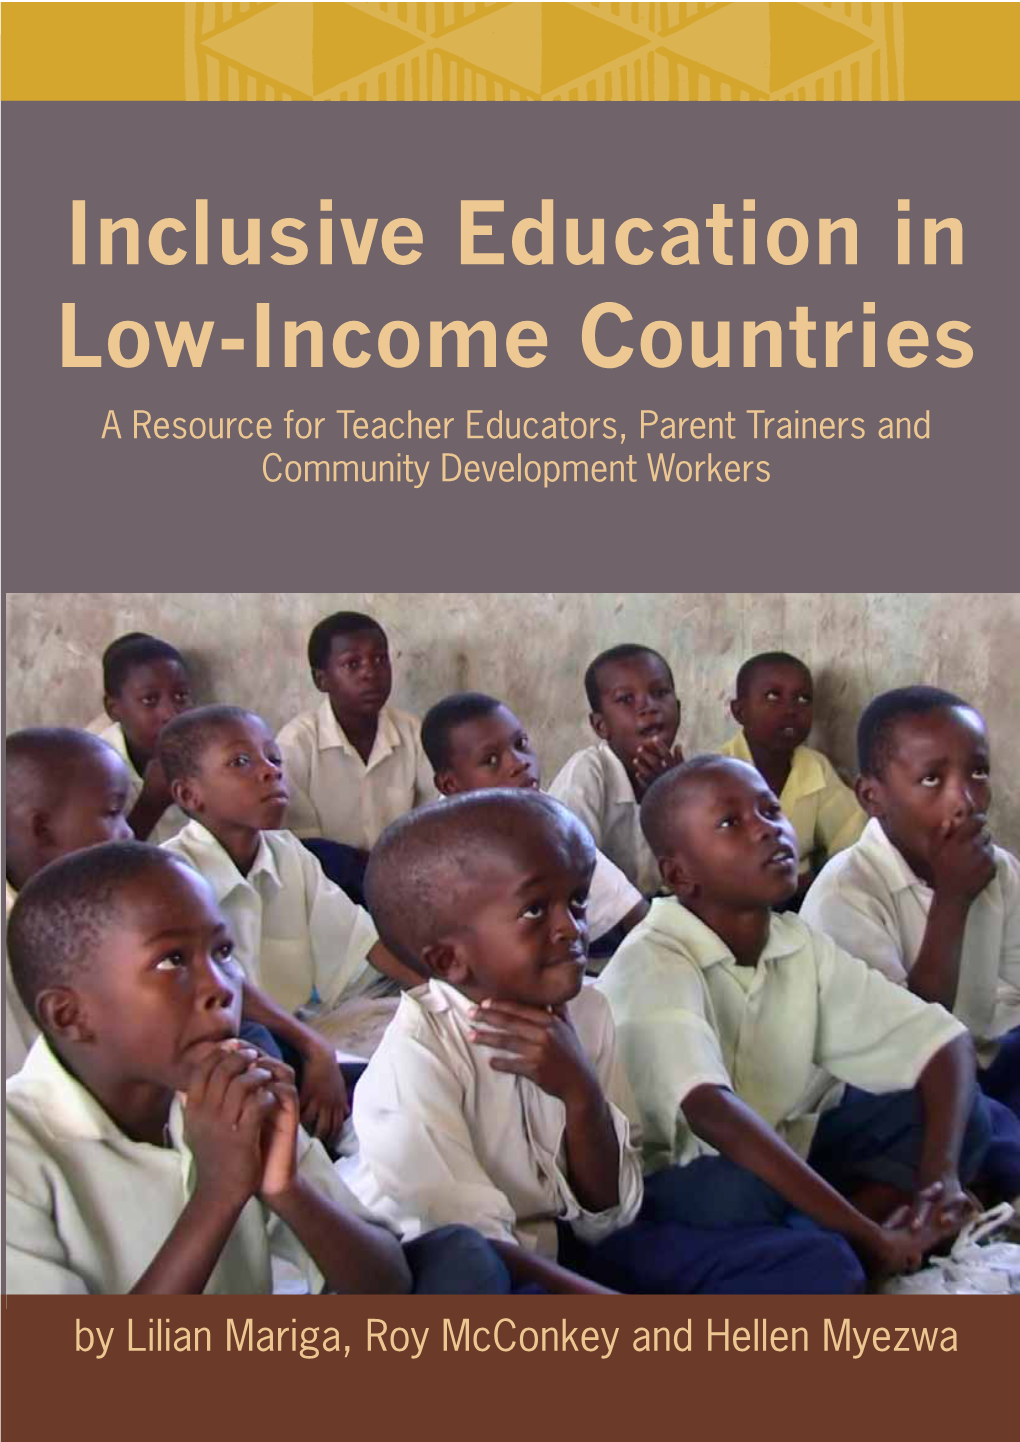 Inclusive Education in Low-Income Countries: a Resource Book for Teacher Educators, Parent Trainers and Community Development Workers